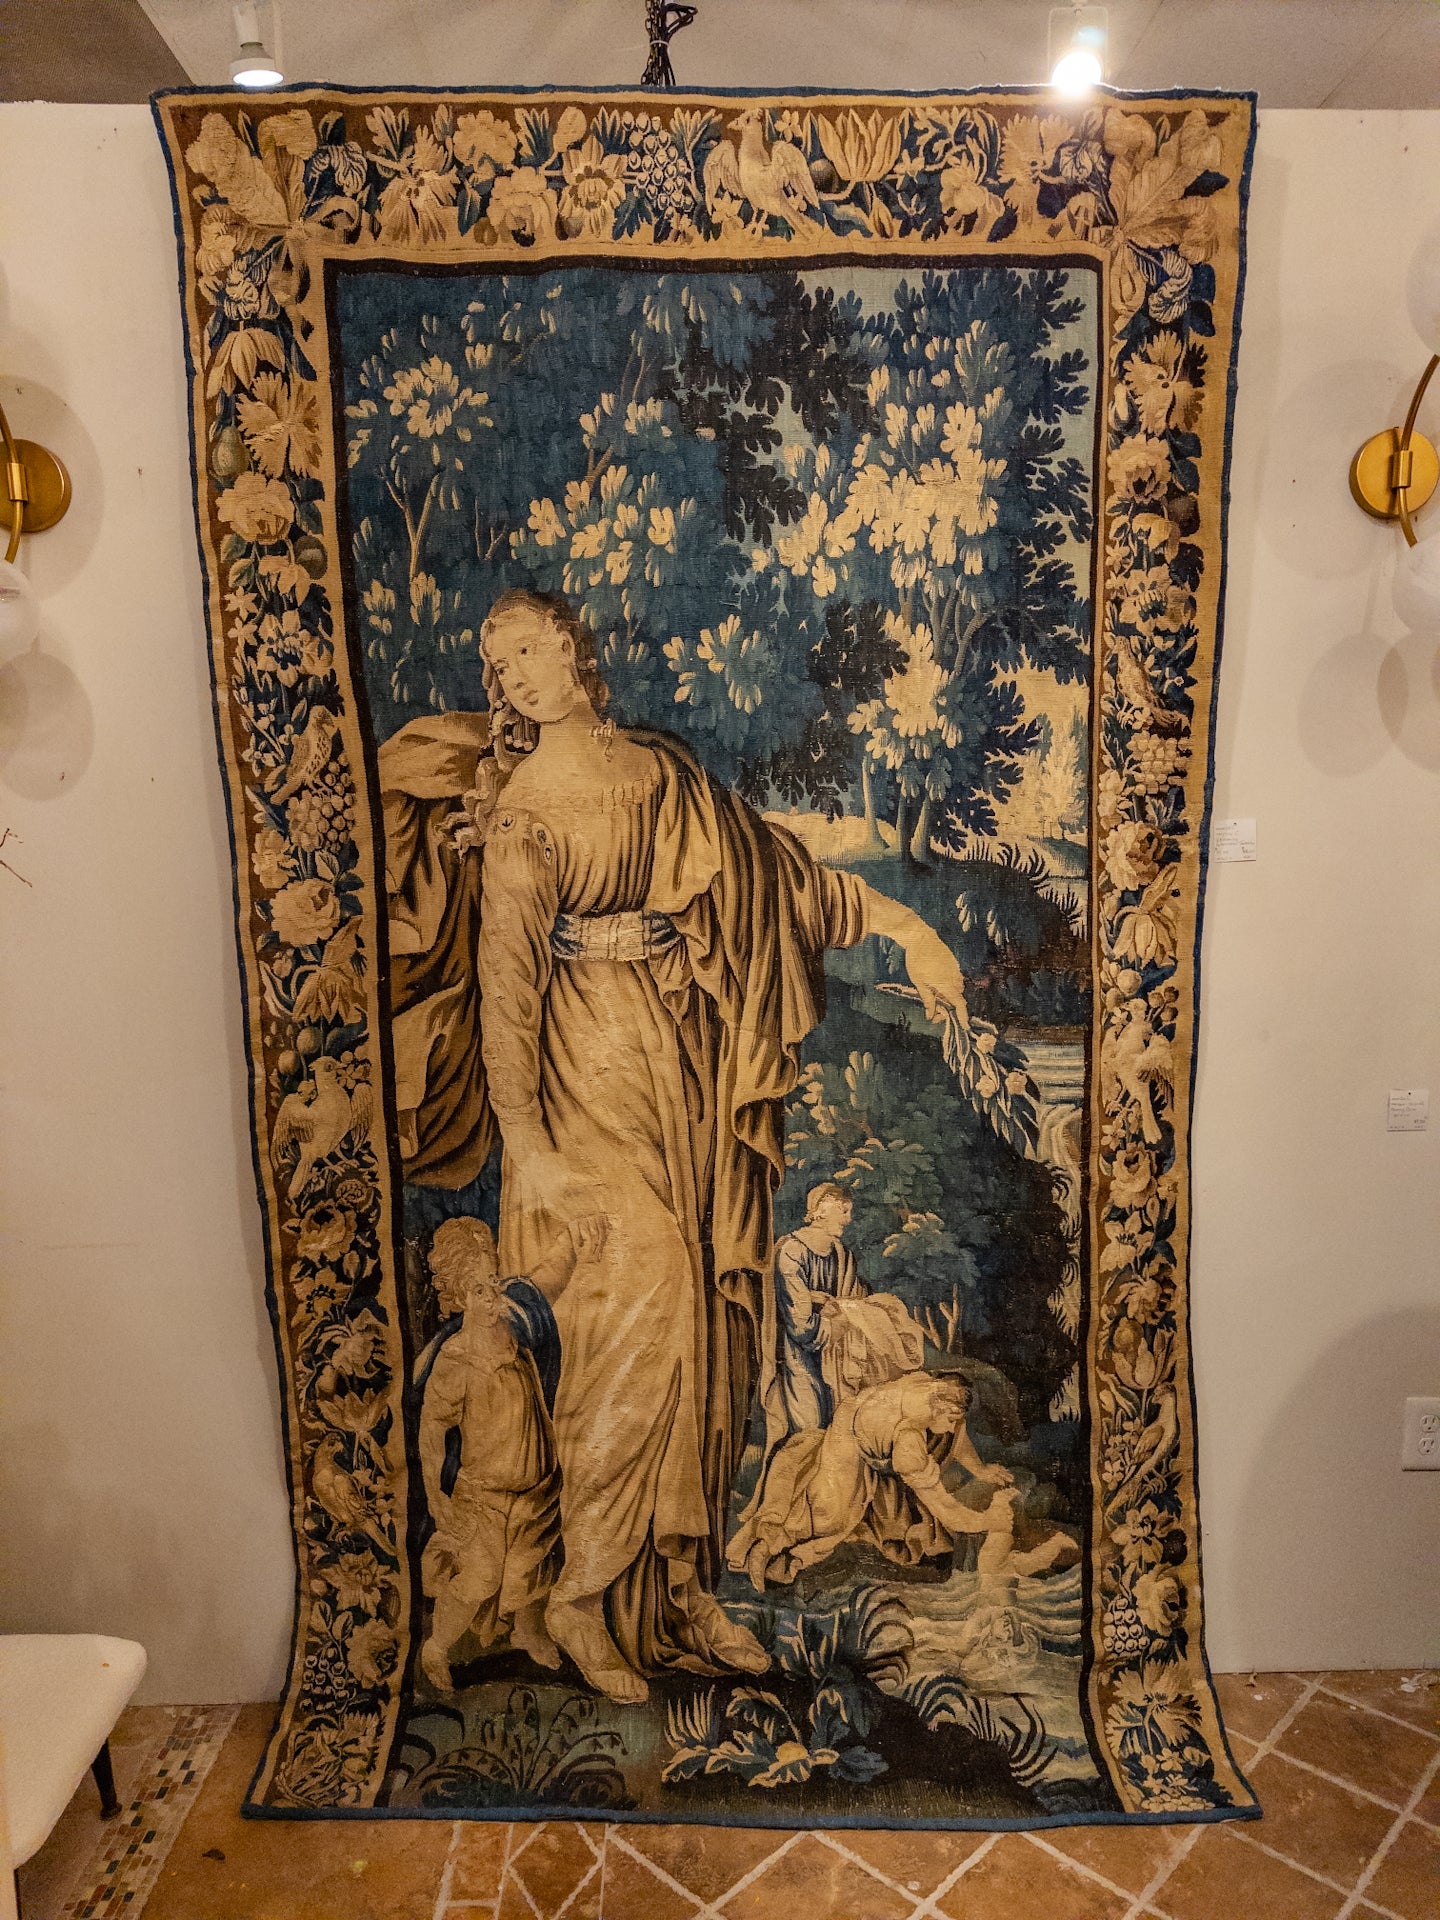 The 17th Century Flemish Aubusson Tapestry portraying a woman traveling or walking with her child is a captivating depiction of everyday life from that era. Executed with remarkable detail and finesse, the tapestry showcases the intricacies of